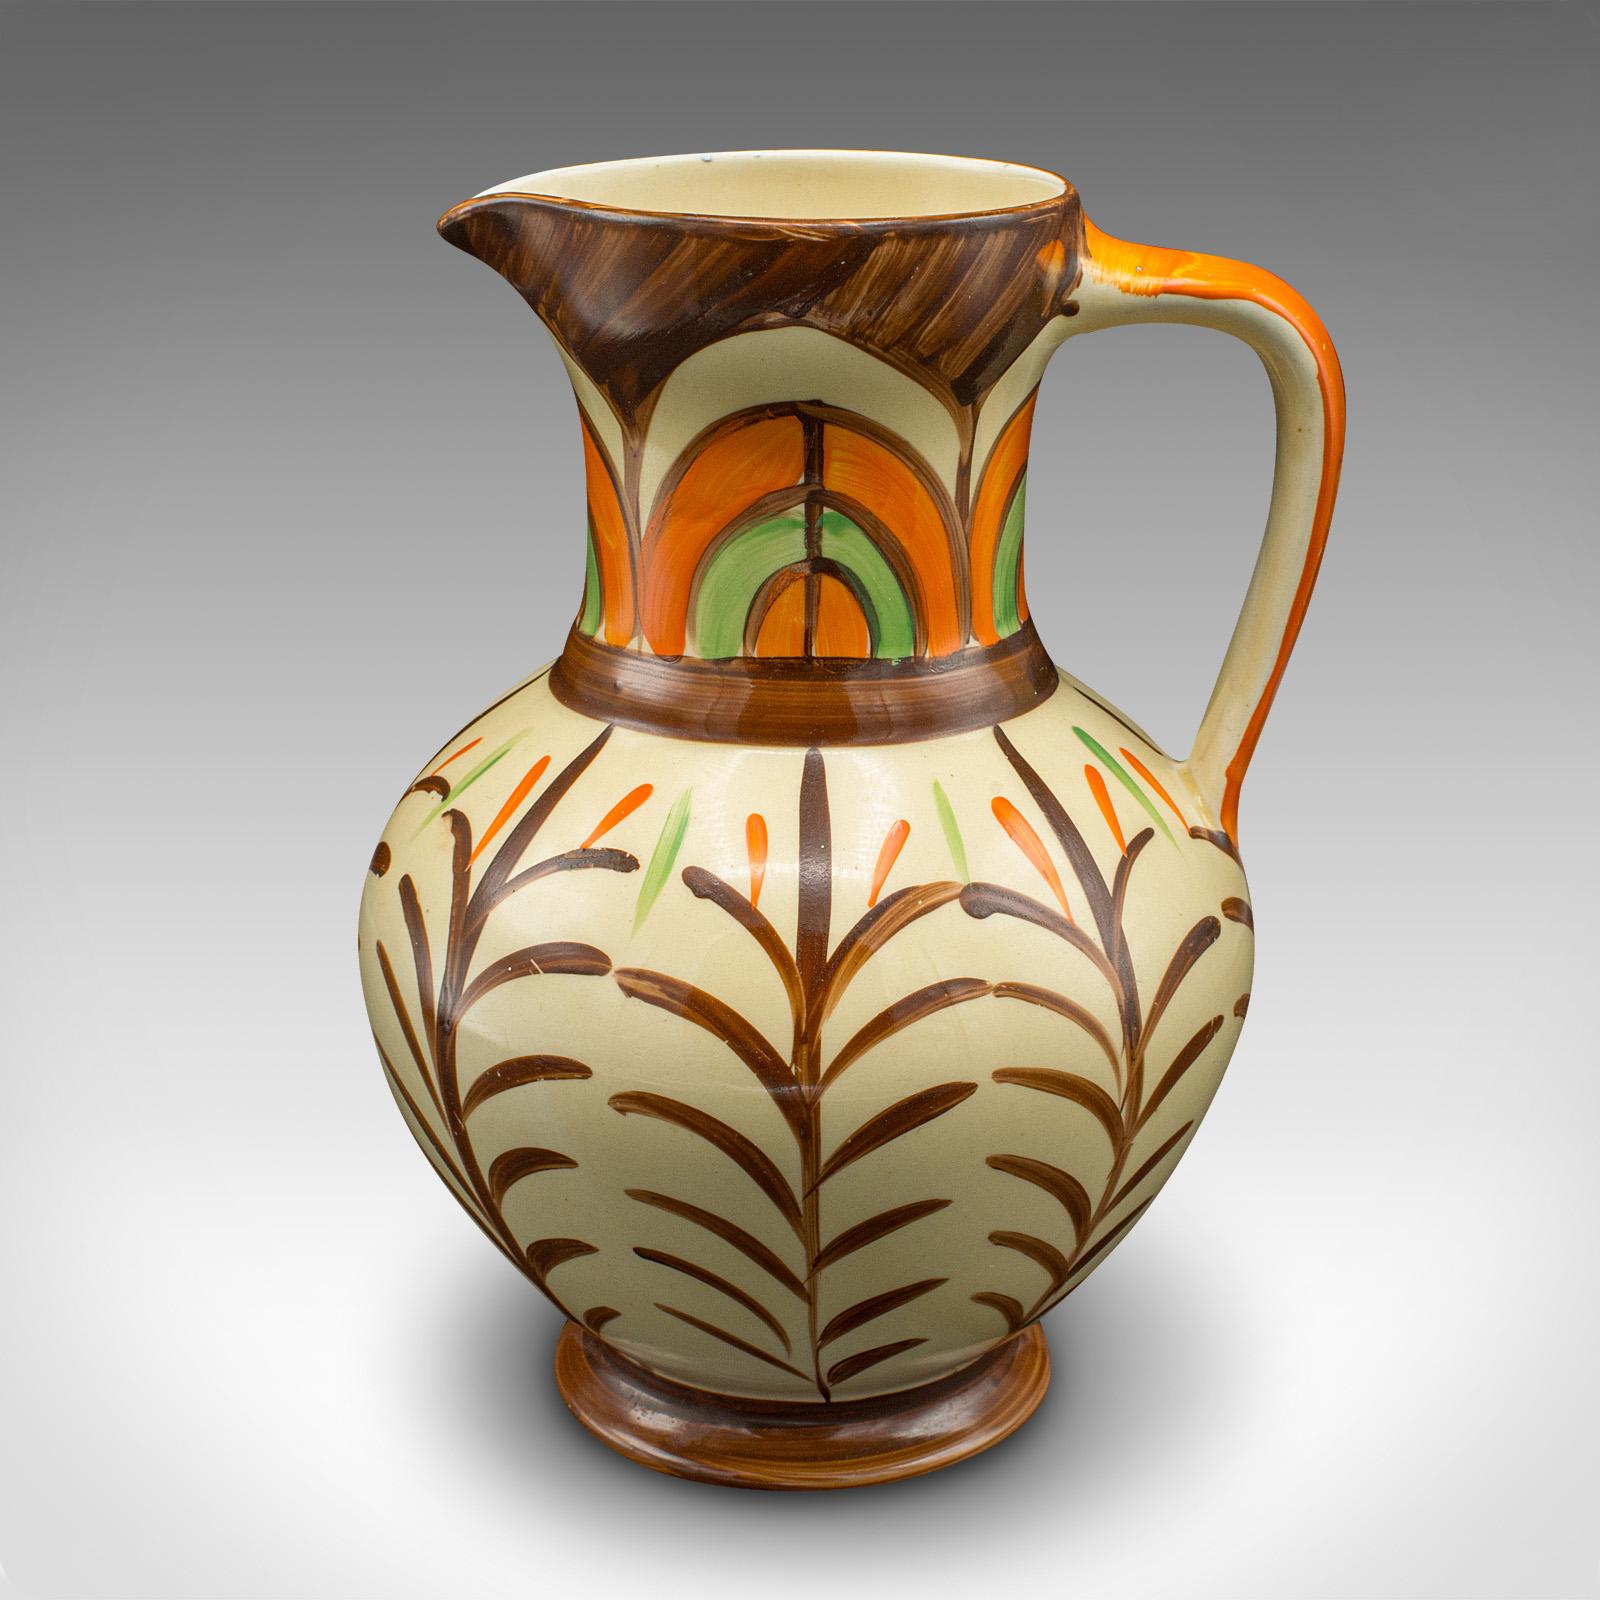 This is a vintage decorative pouring jug. An English, hand painted ceramic pourer in Art Deco taste, dating to the early 20th century, circa 1930.

Charmingly decorative jug with great hand painted colour
Displaying a desirable aged patina and in